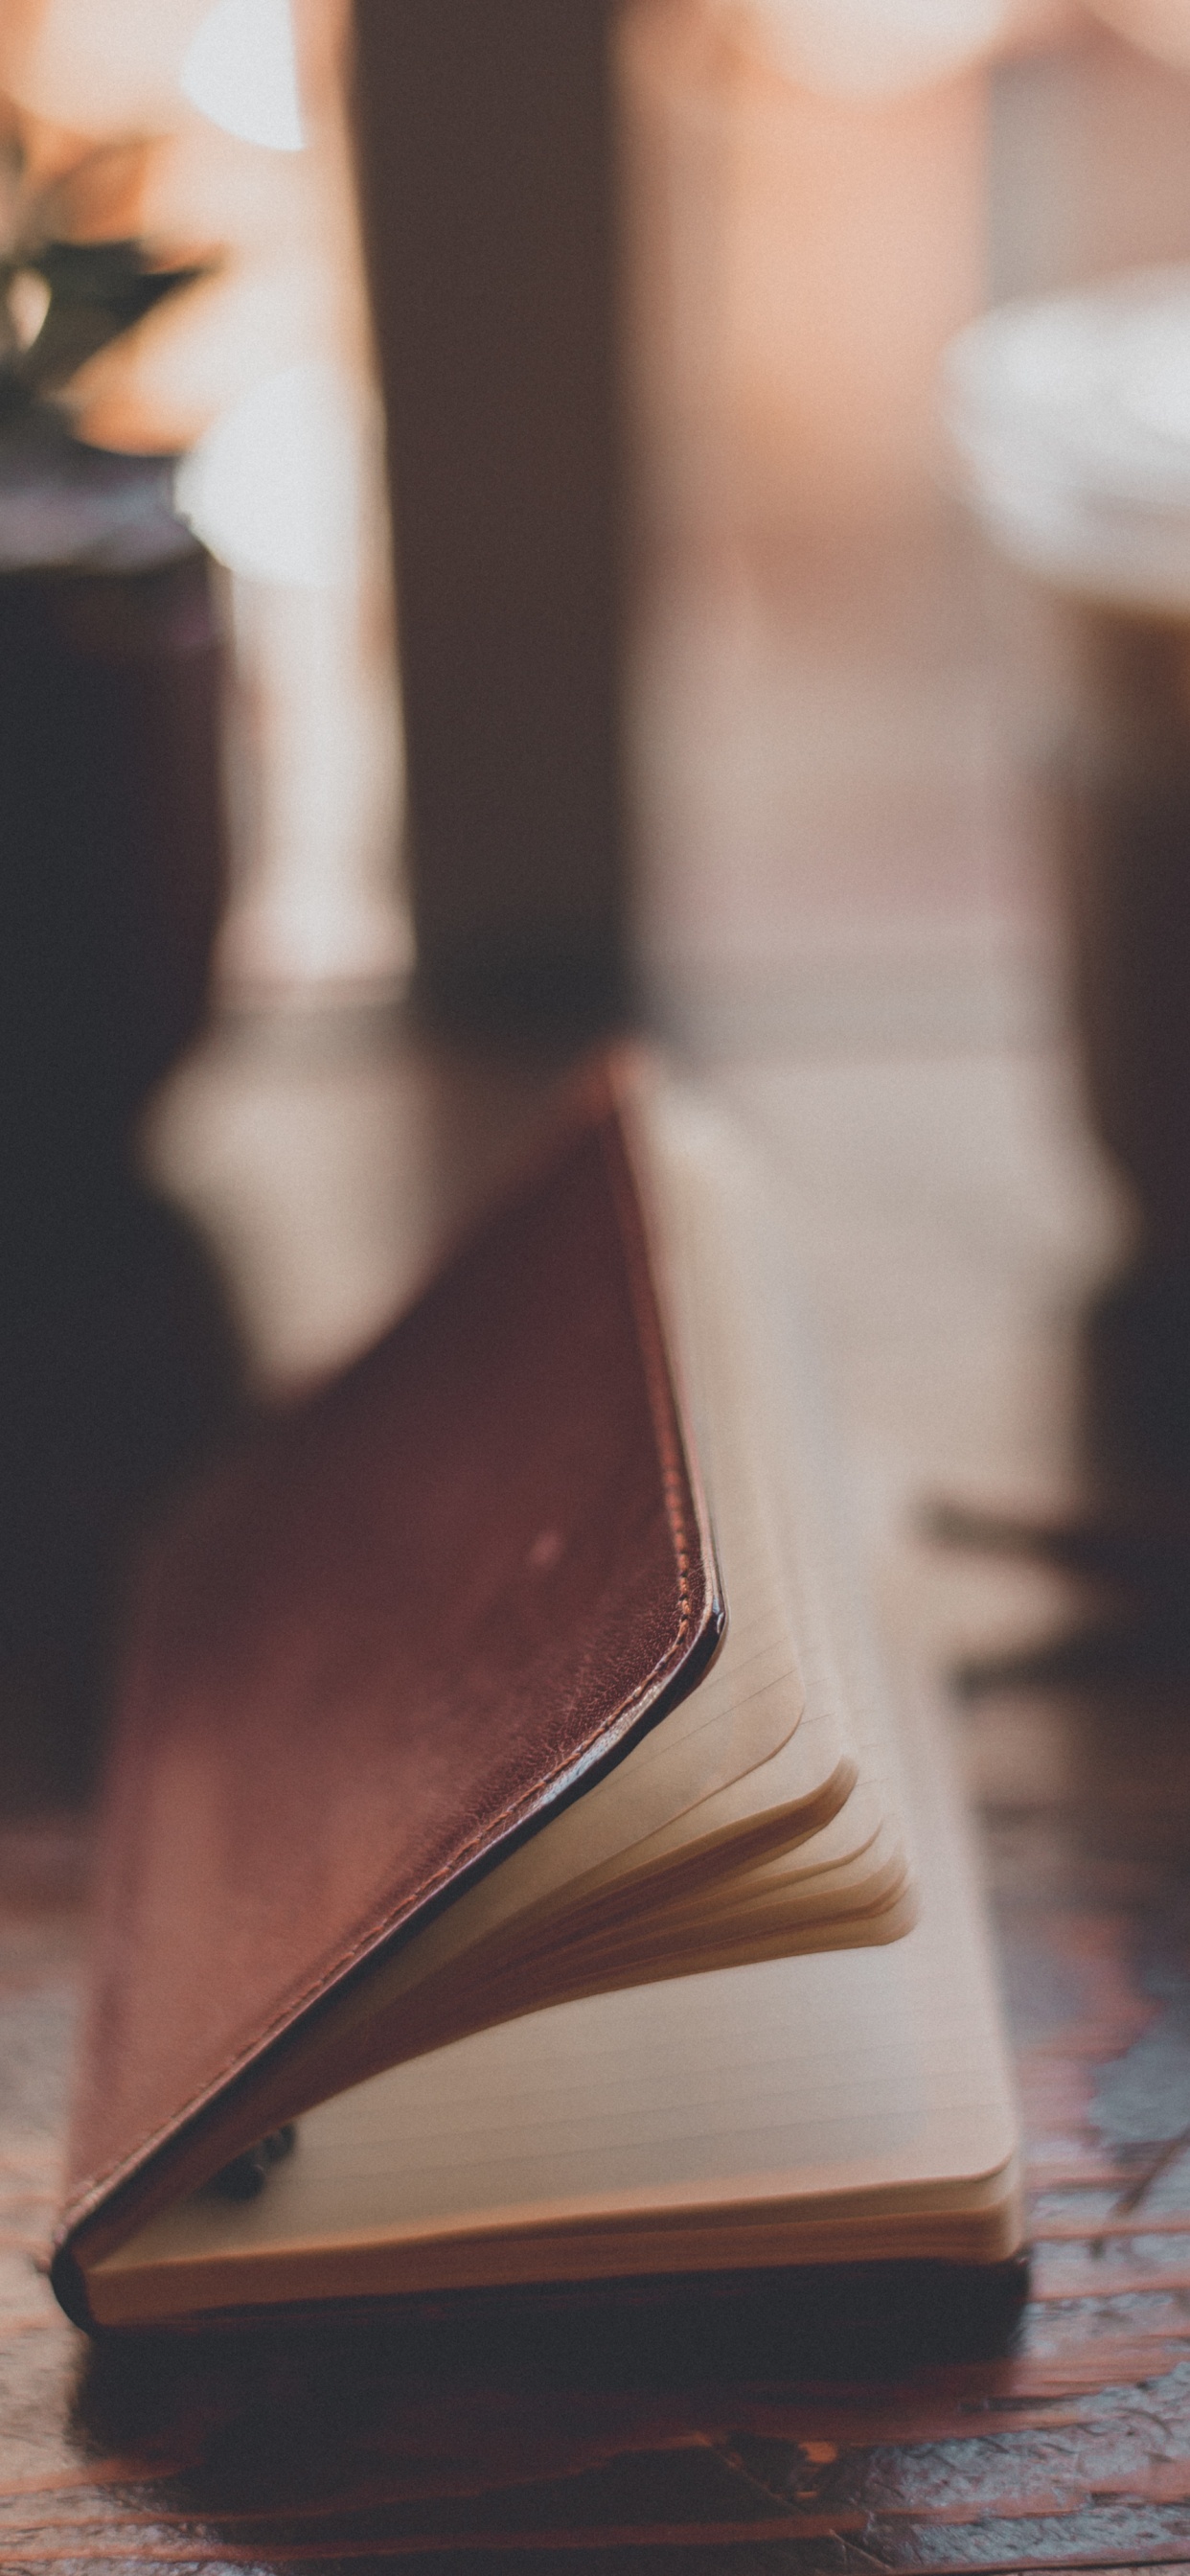 Brown Book on Brown Wooden Table. Wallpaper in 1242x2688 Resolution